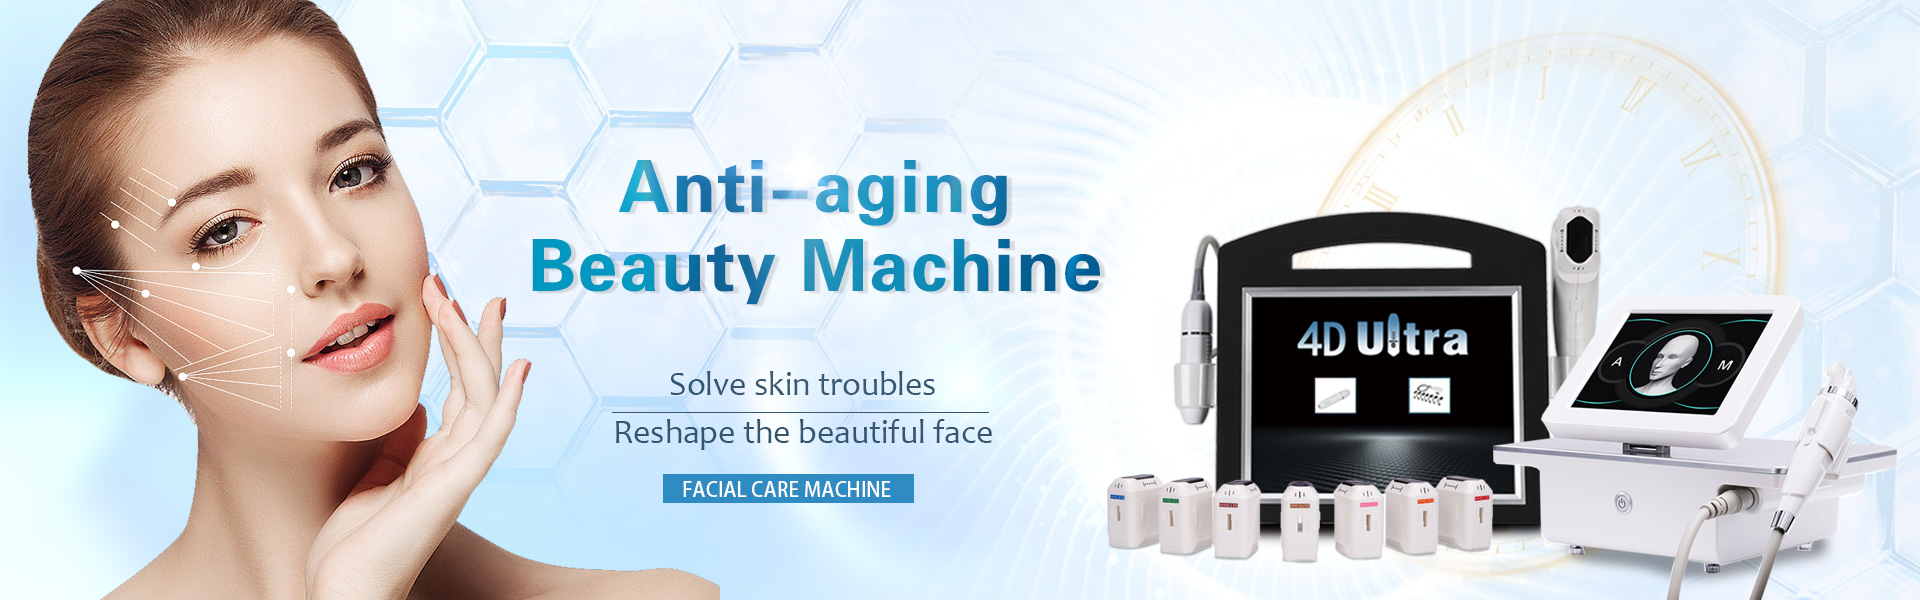 Wrinkle Removal Anti-aging Beauty Equipment